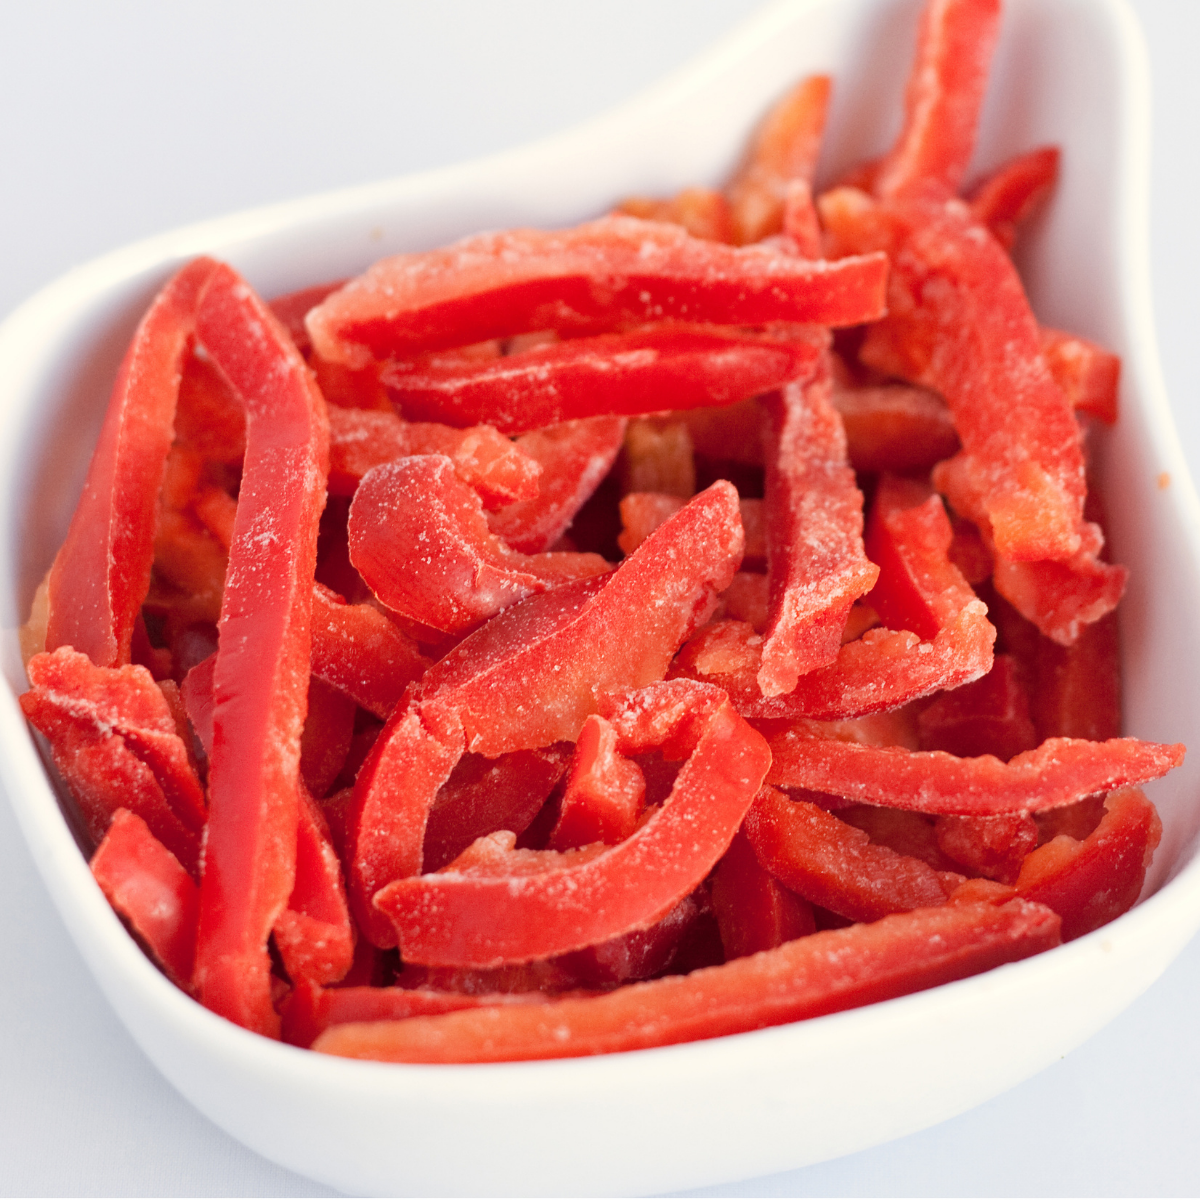 Red bell pepper shredded from Magnihill